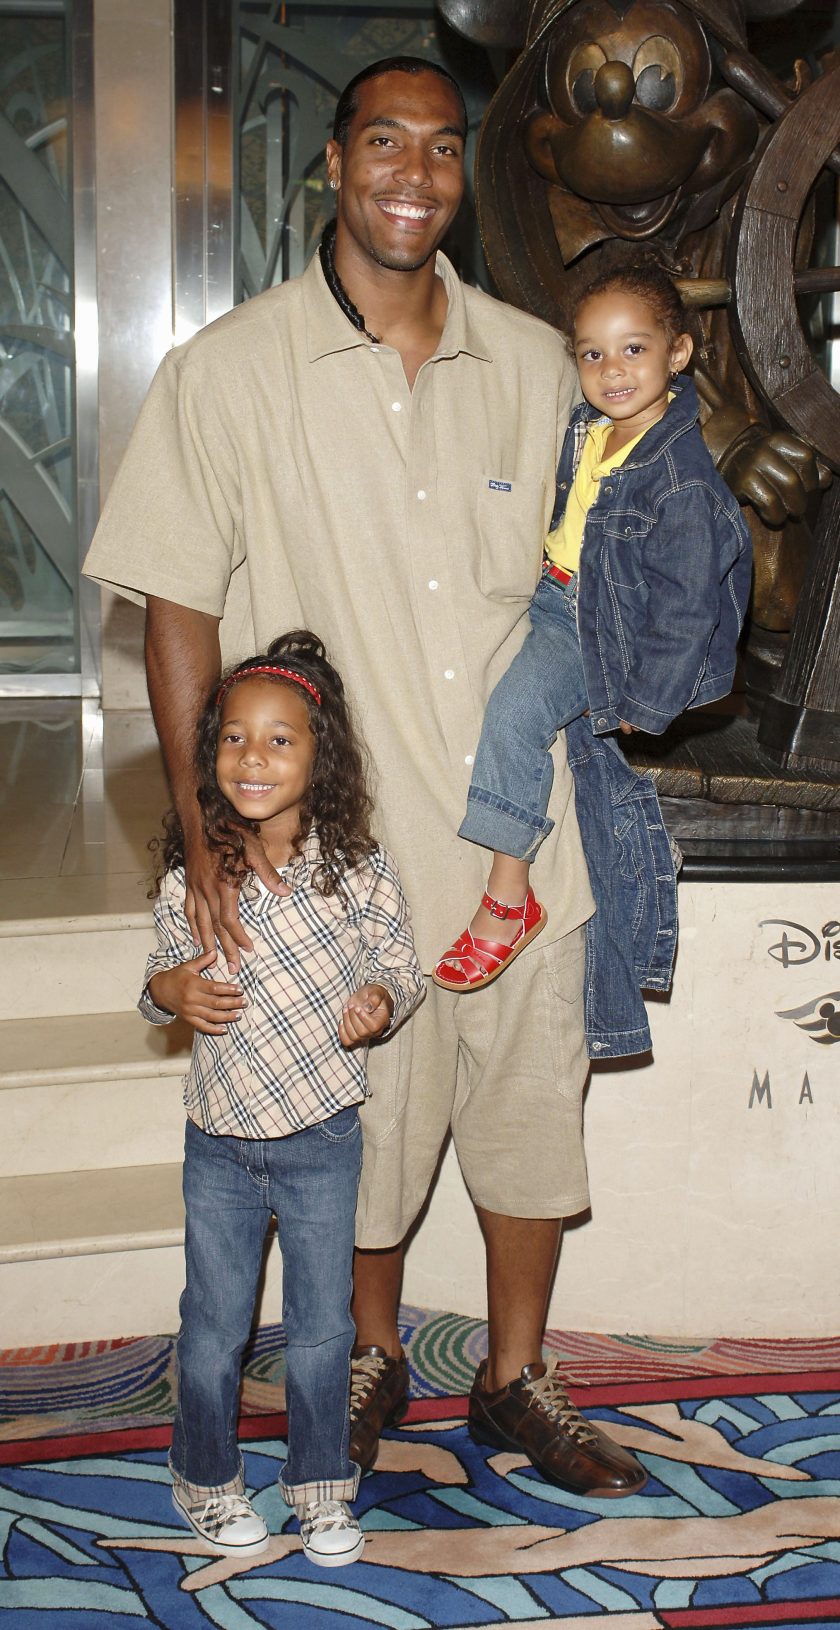 T.J. Houshmandzadeh and family attend Disney's Make-A-Wish Fundraiser "An Evening of Magic" in 2005.